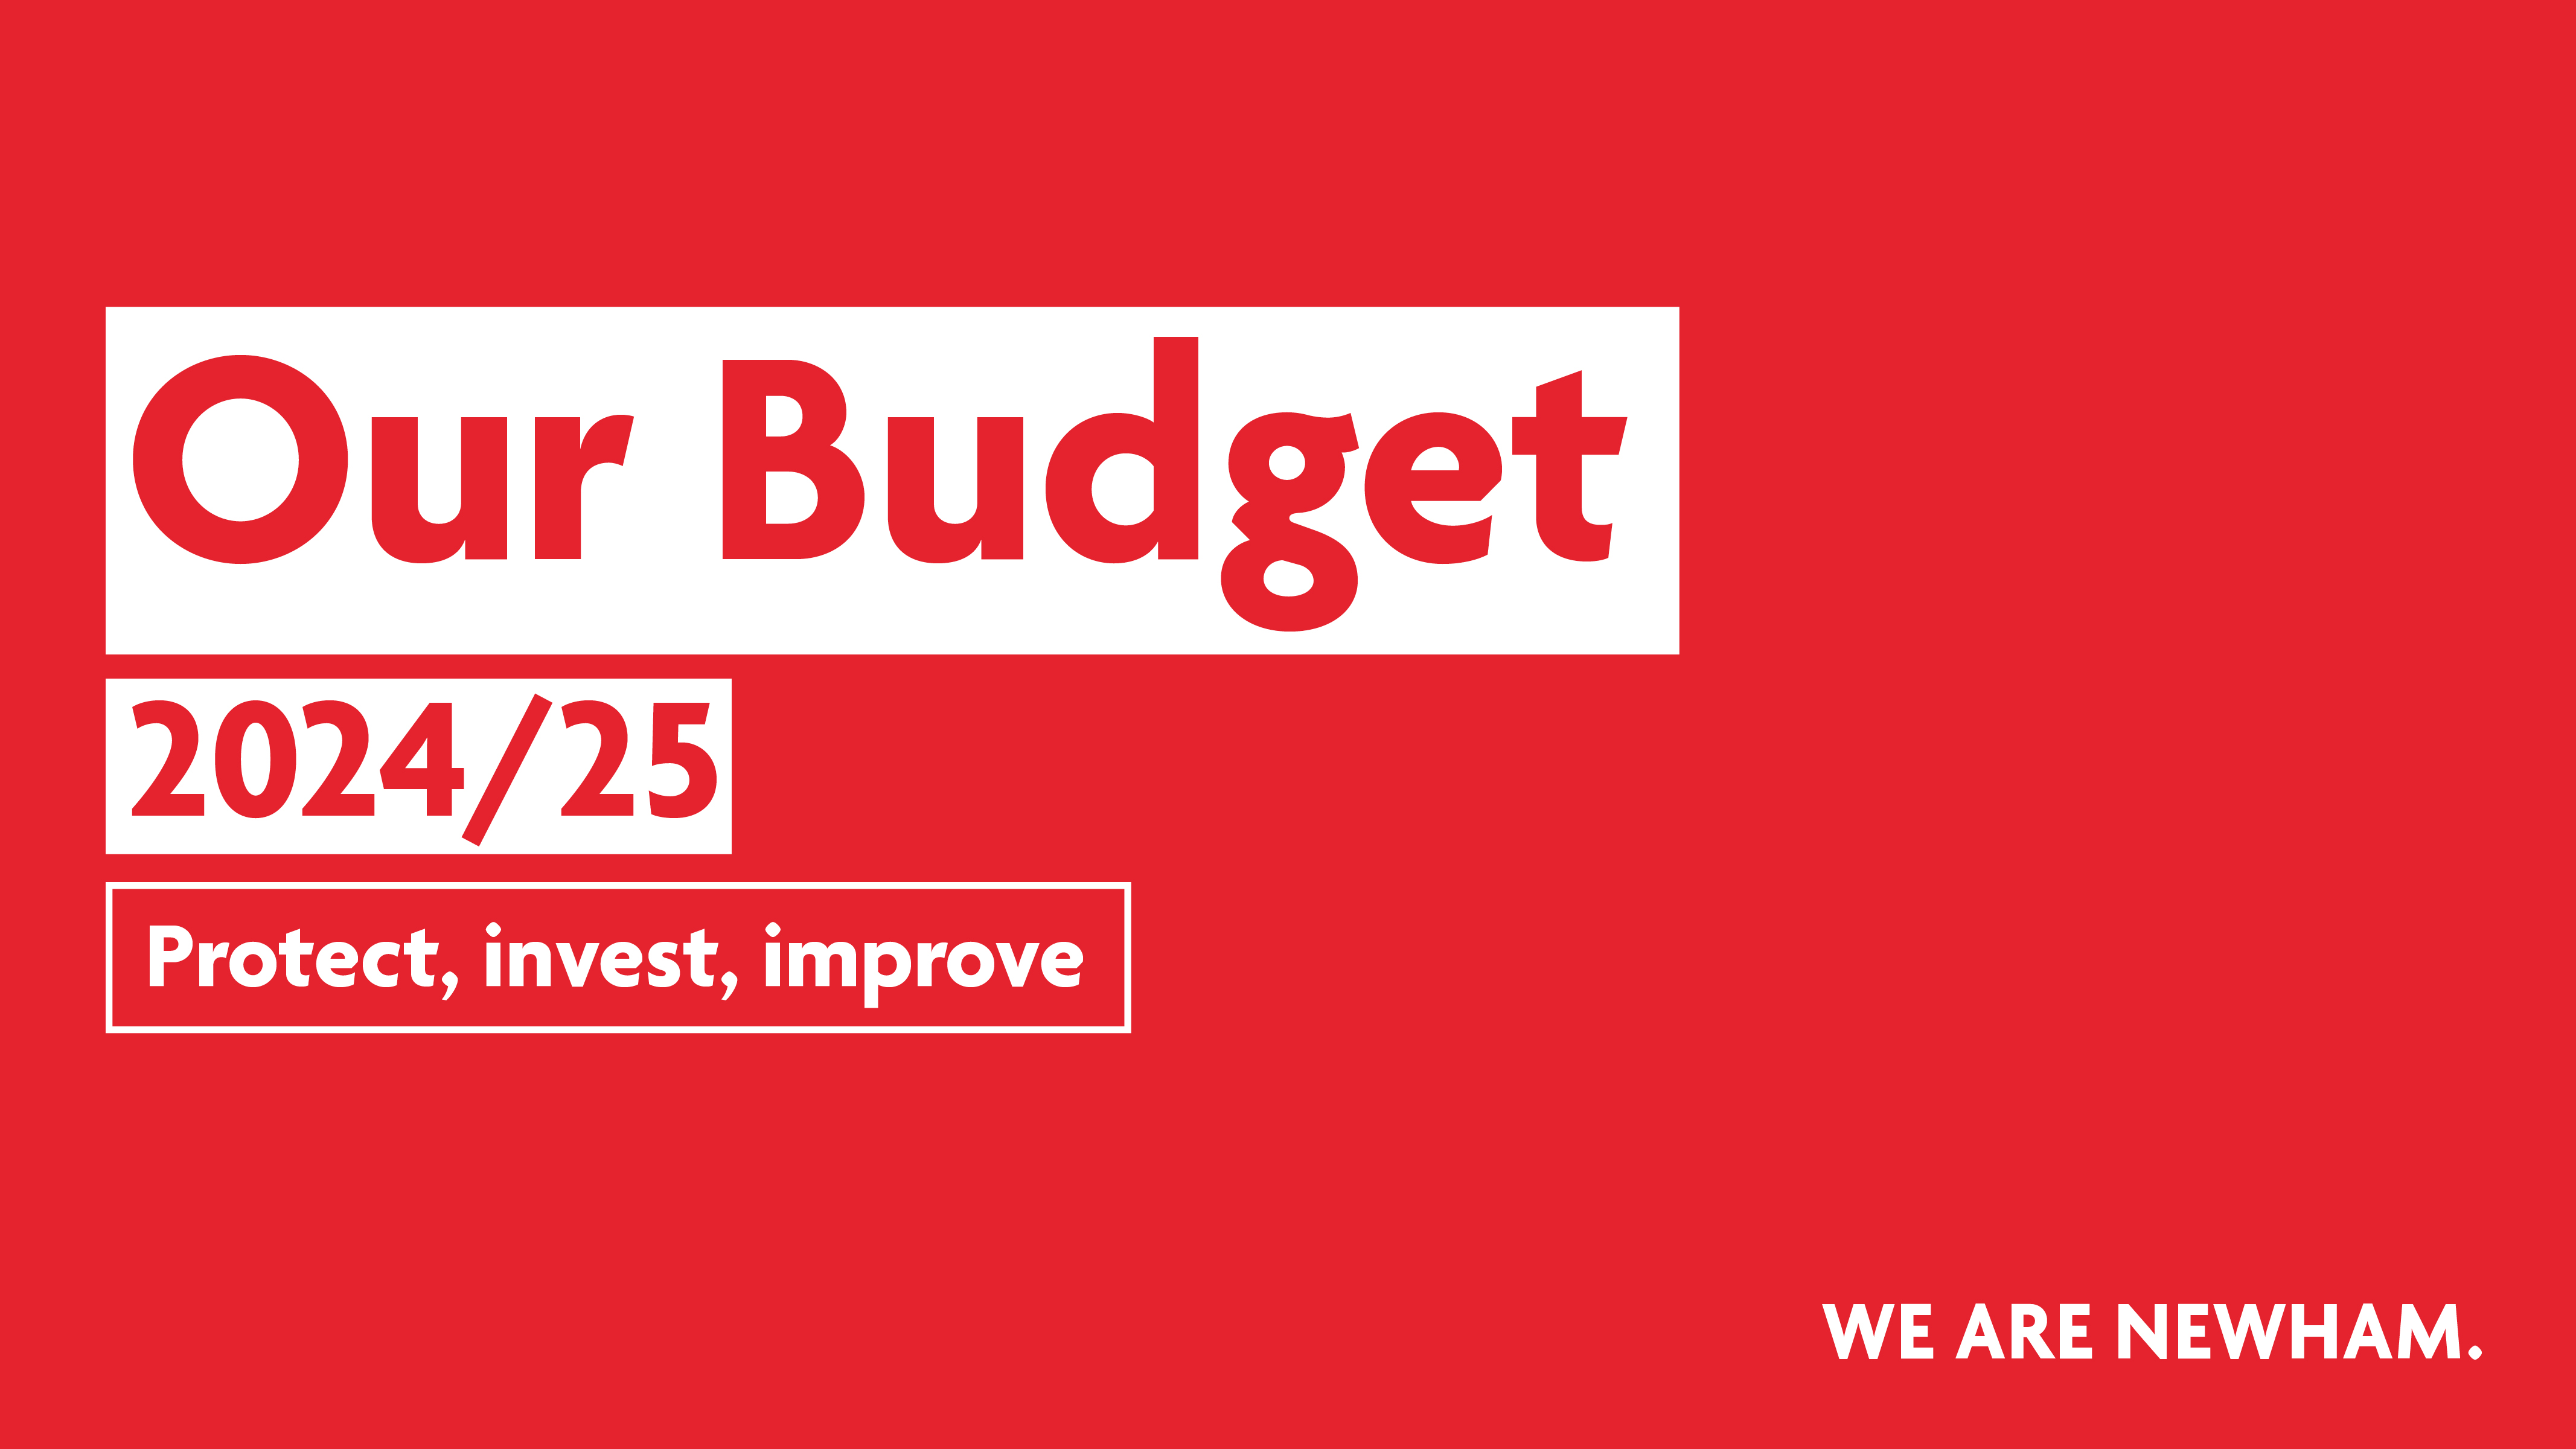 Our Budget 2024/25 graphic